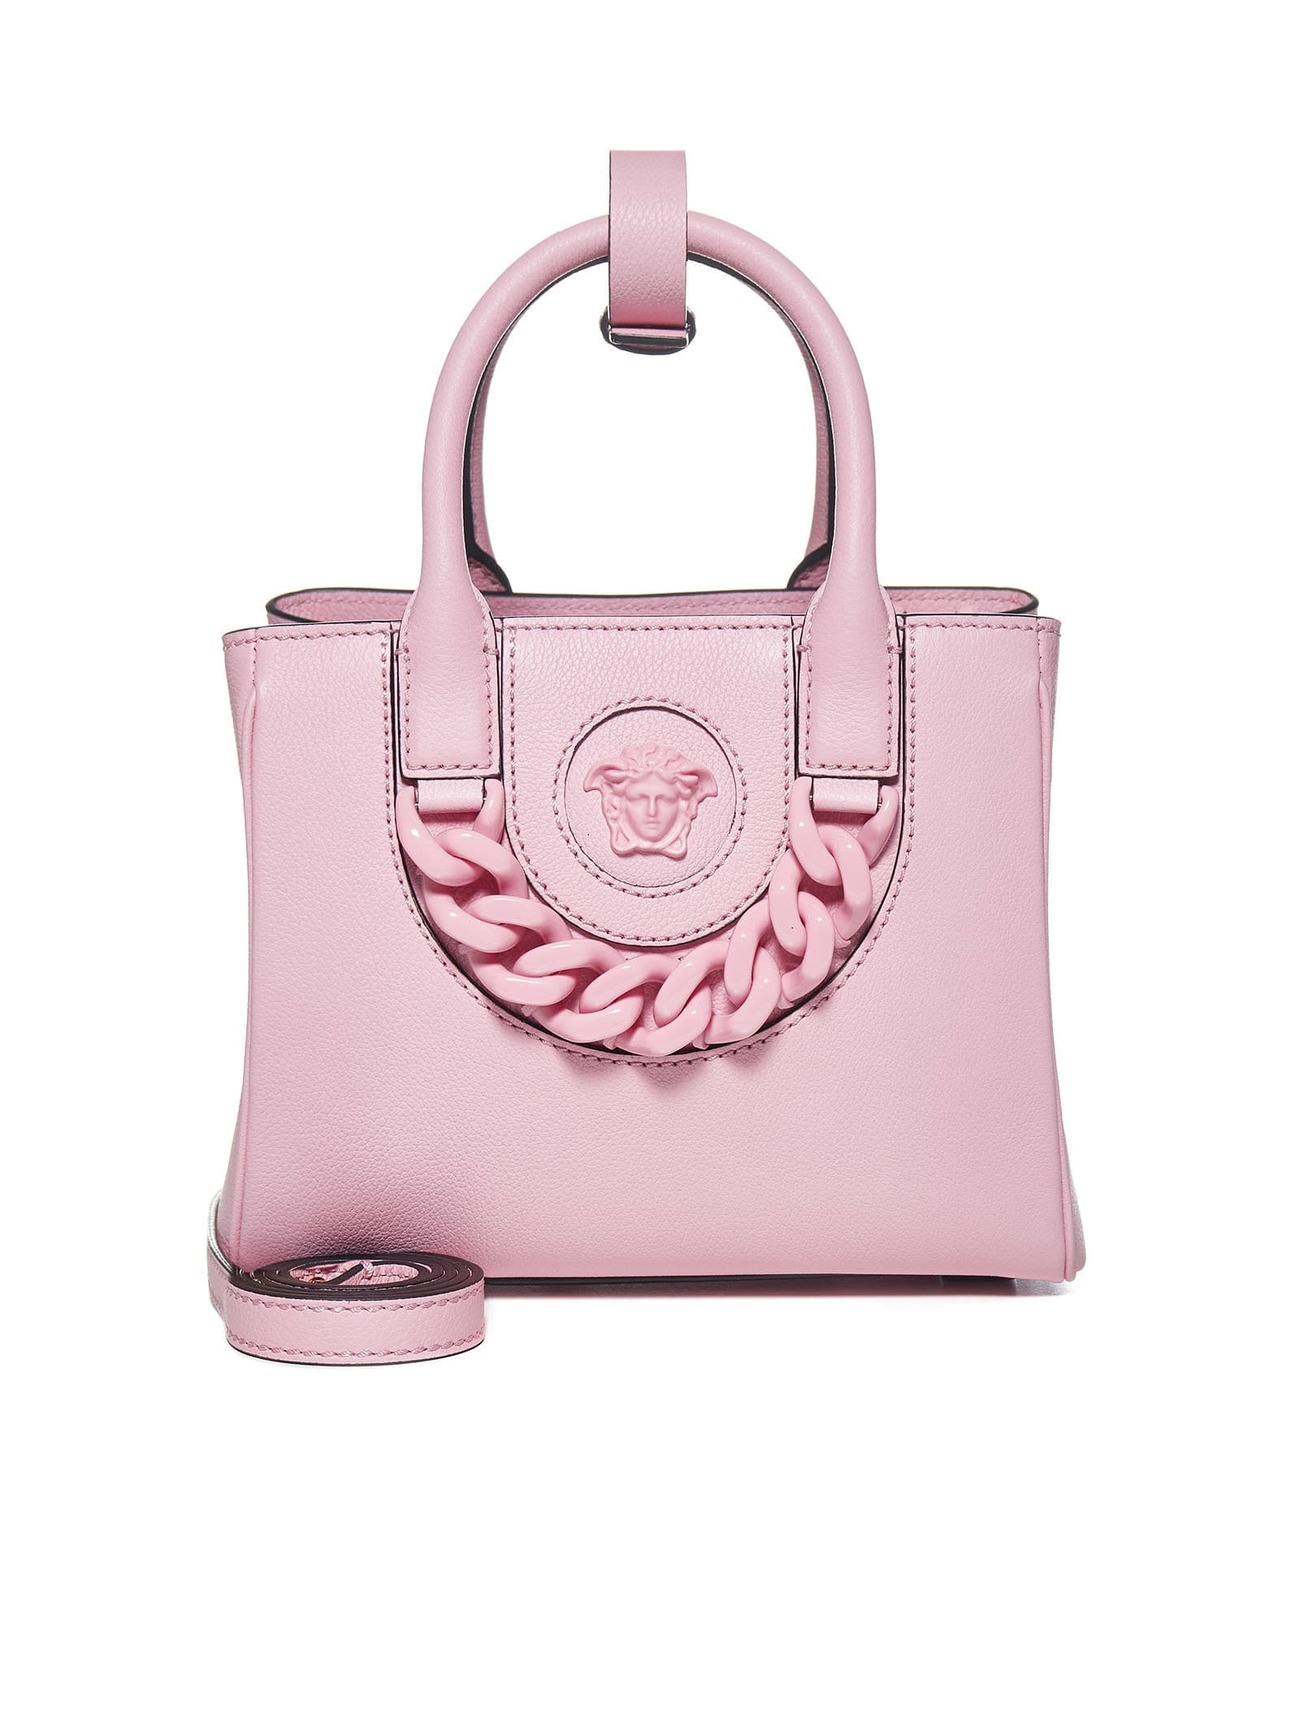 Versace Tote in pink